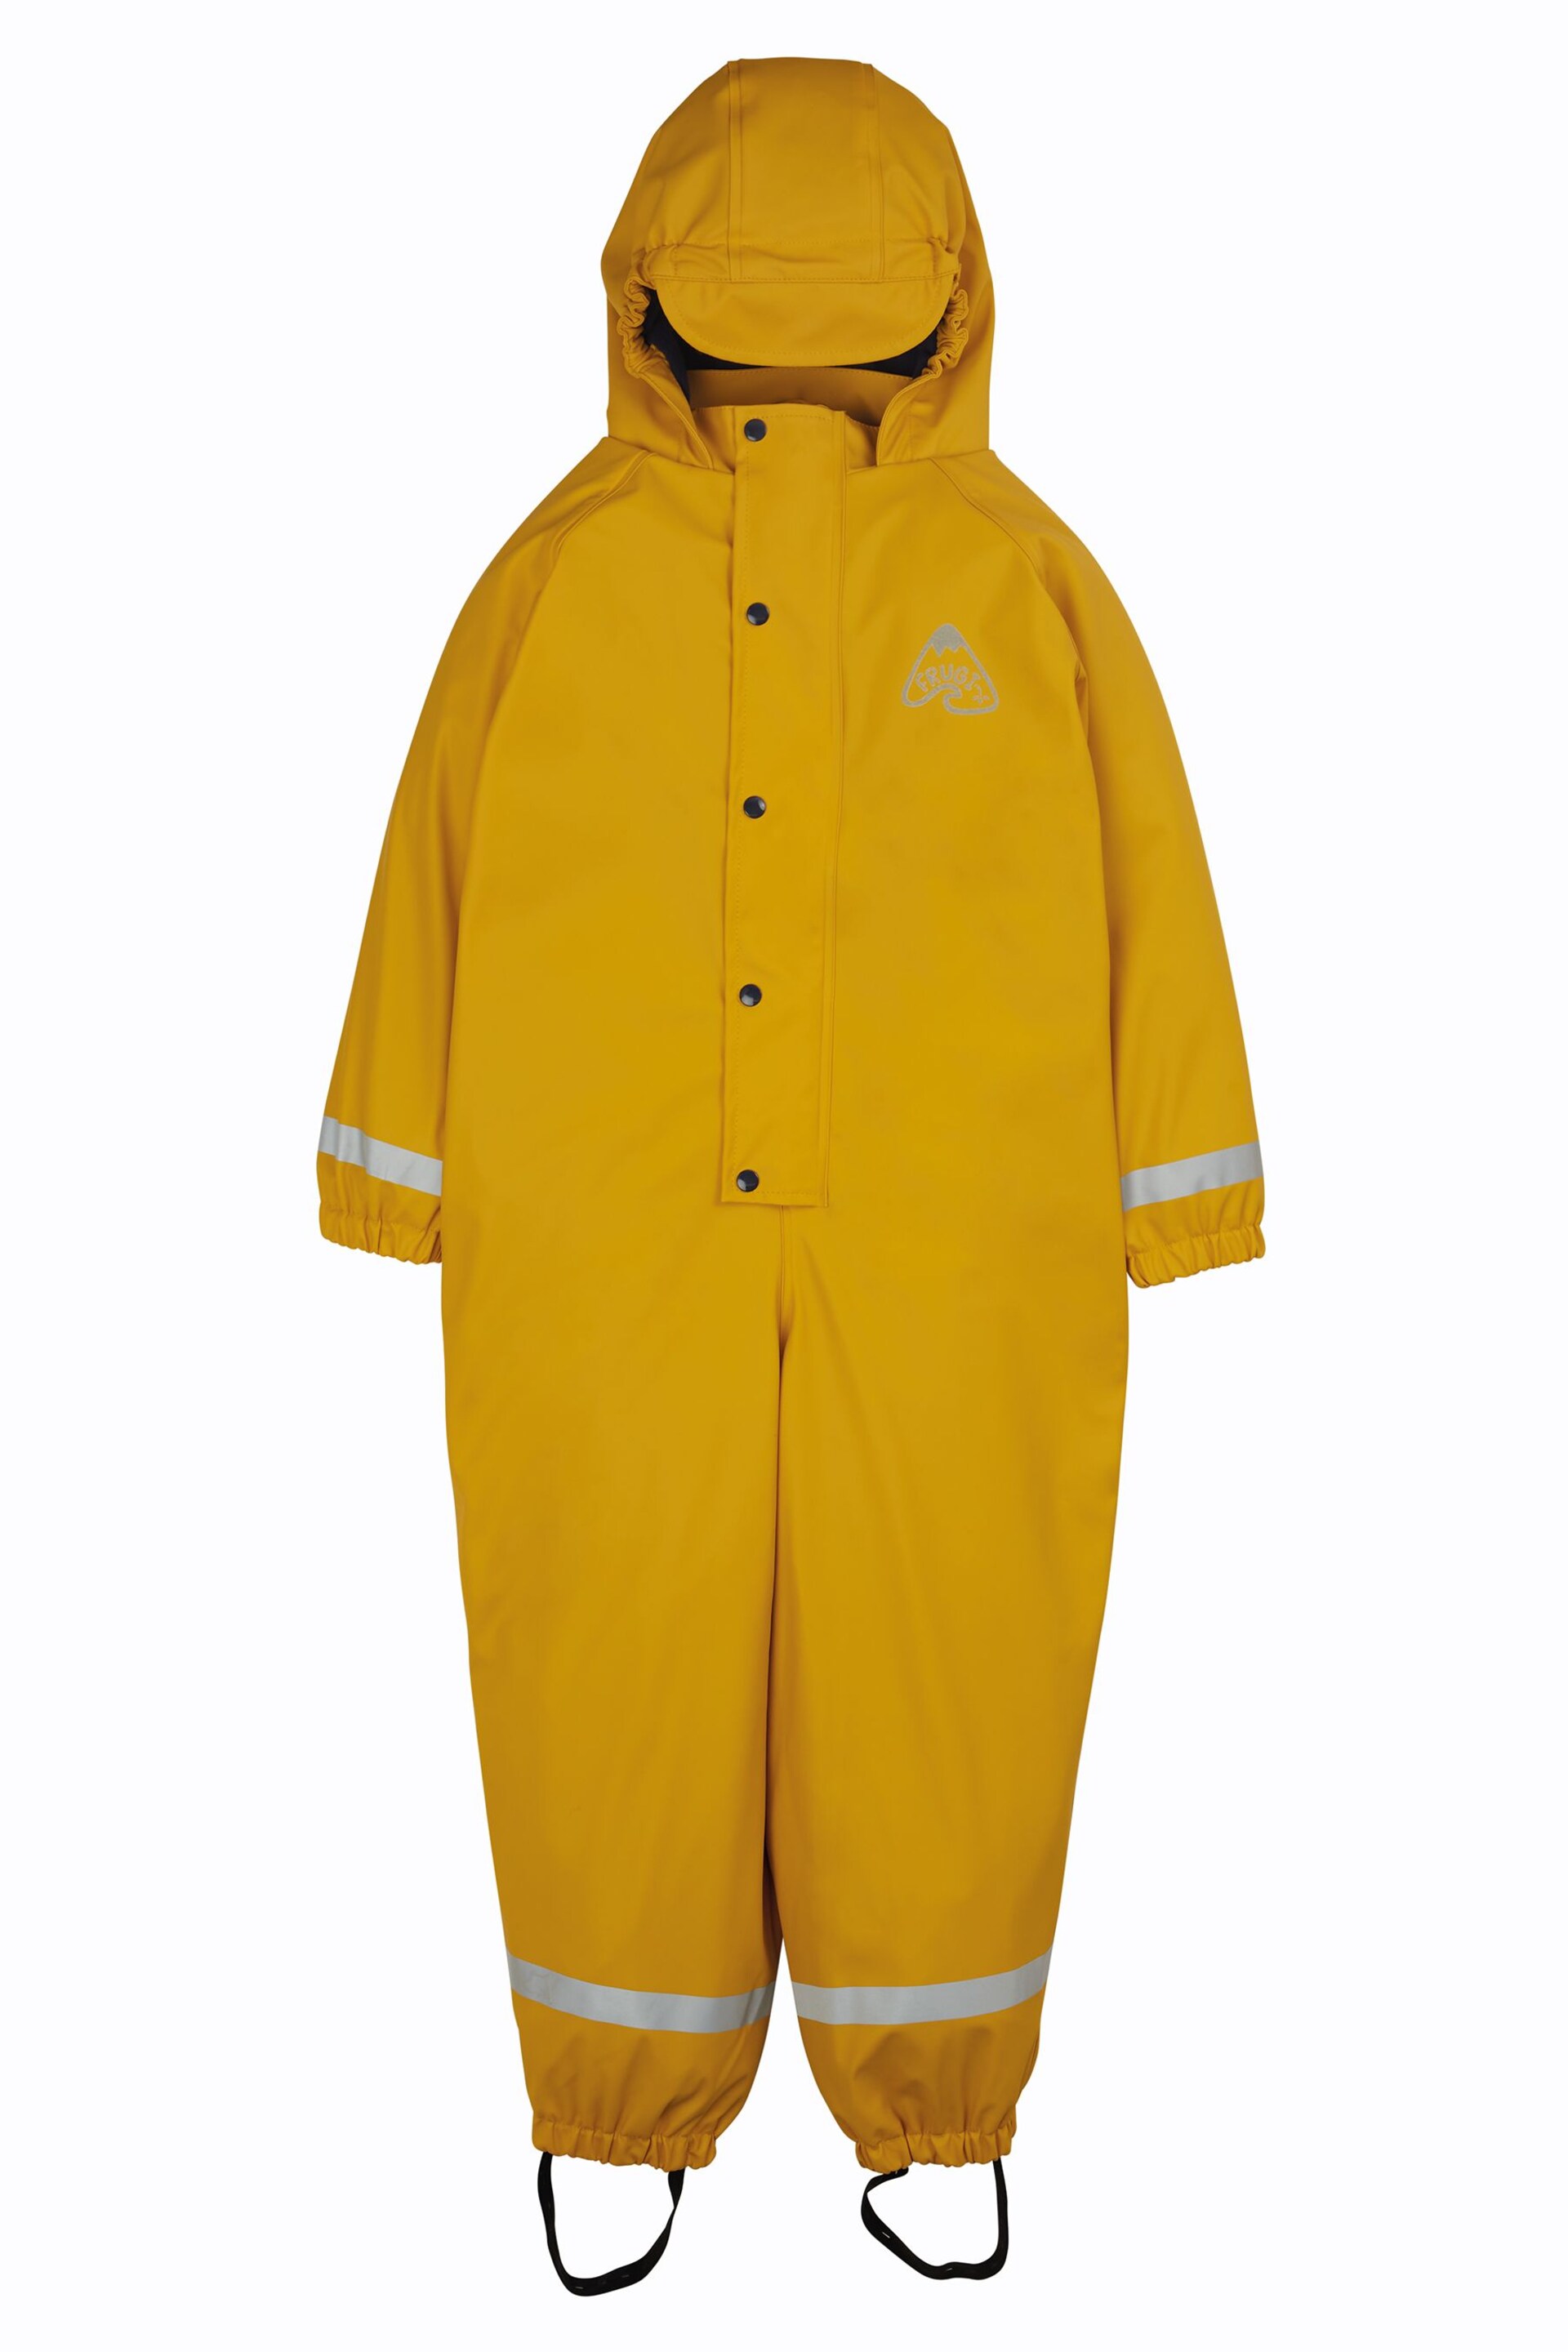 Frugi Yellow Waterproof All-In-One Puddlesuit - Image 1 of 5